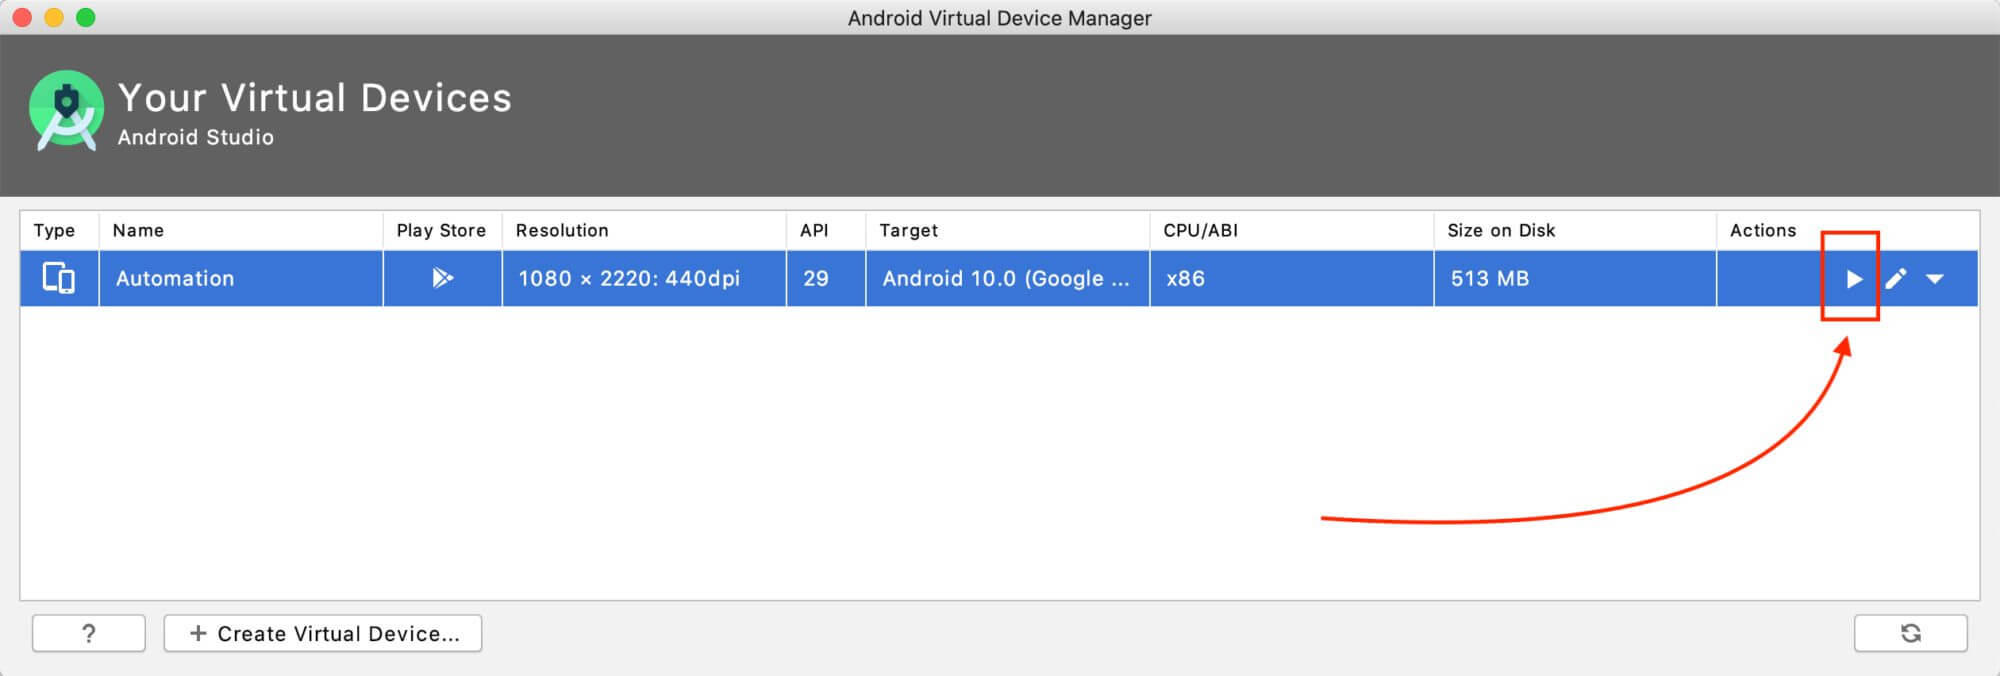 Android Virtual Device Manager screen with and emulator named Automation 